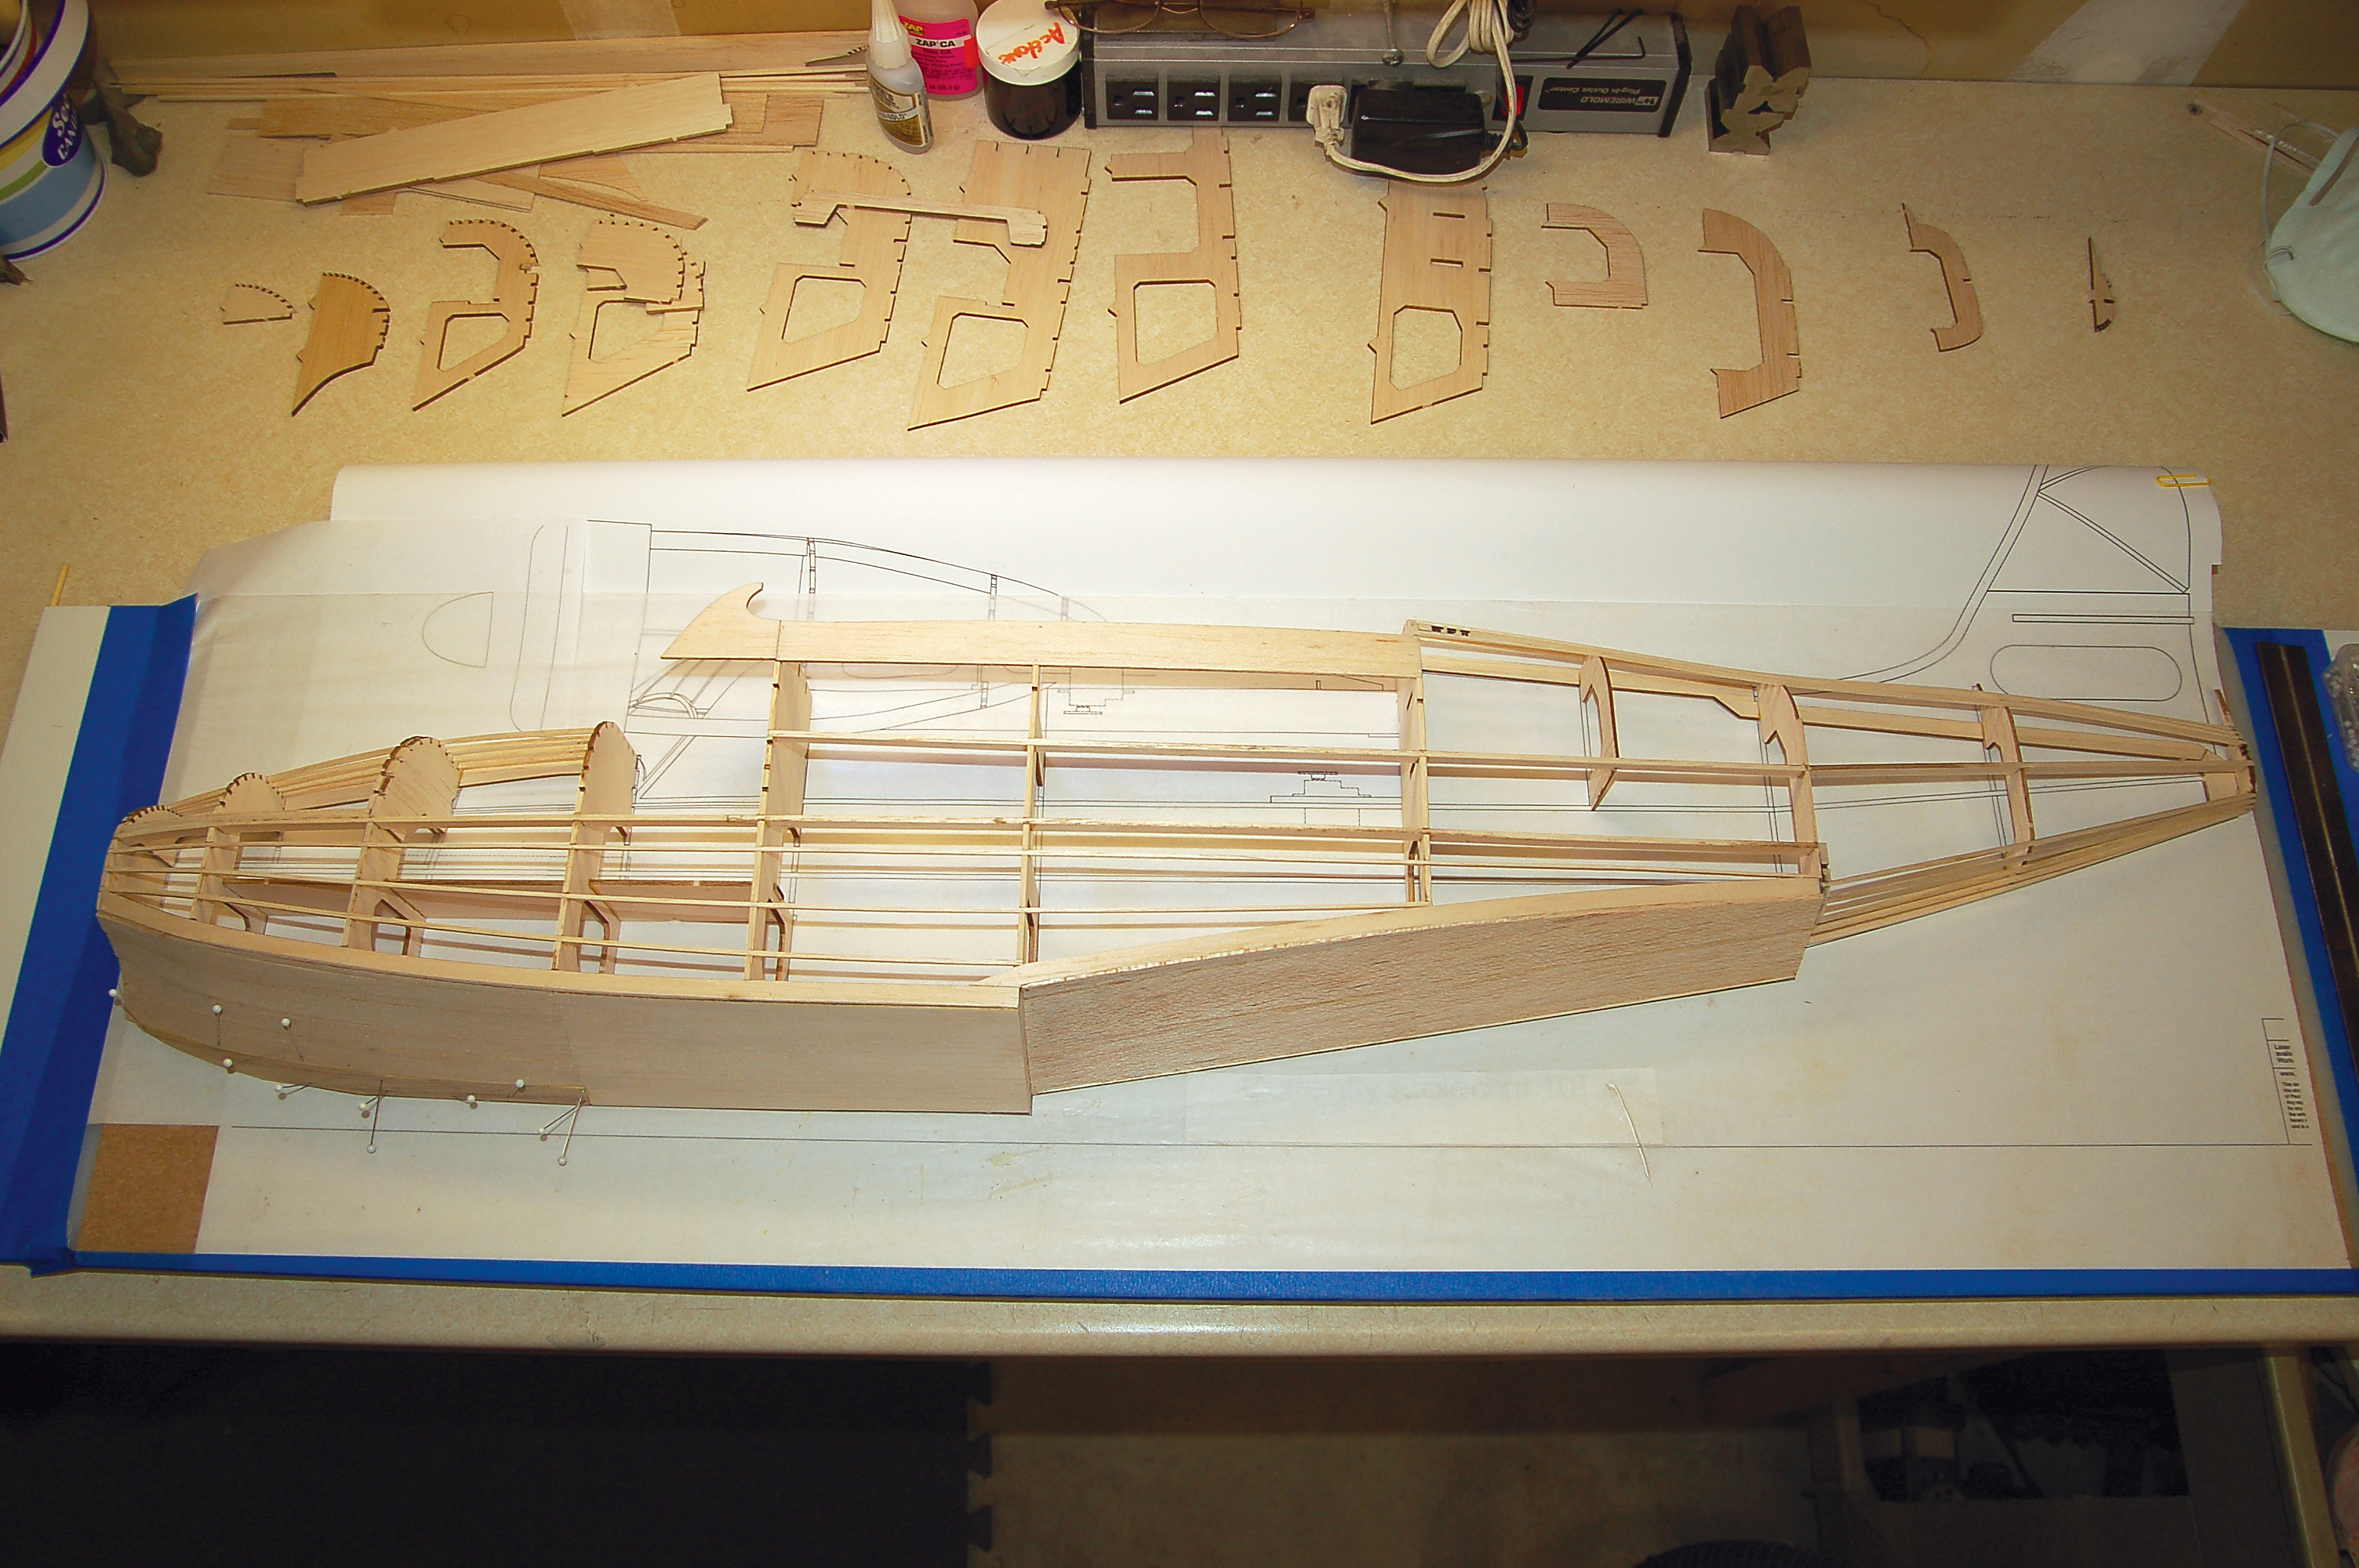 The port side of the fuselage is fi nished. When the sheeting cures the structure becomes extremely rigid.